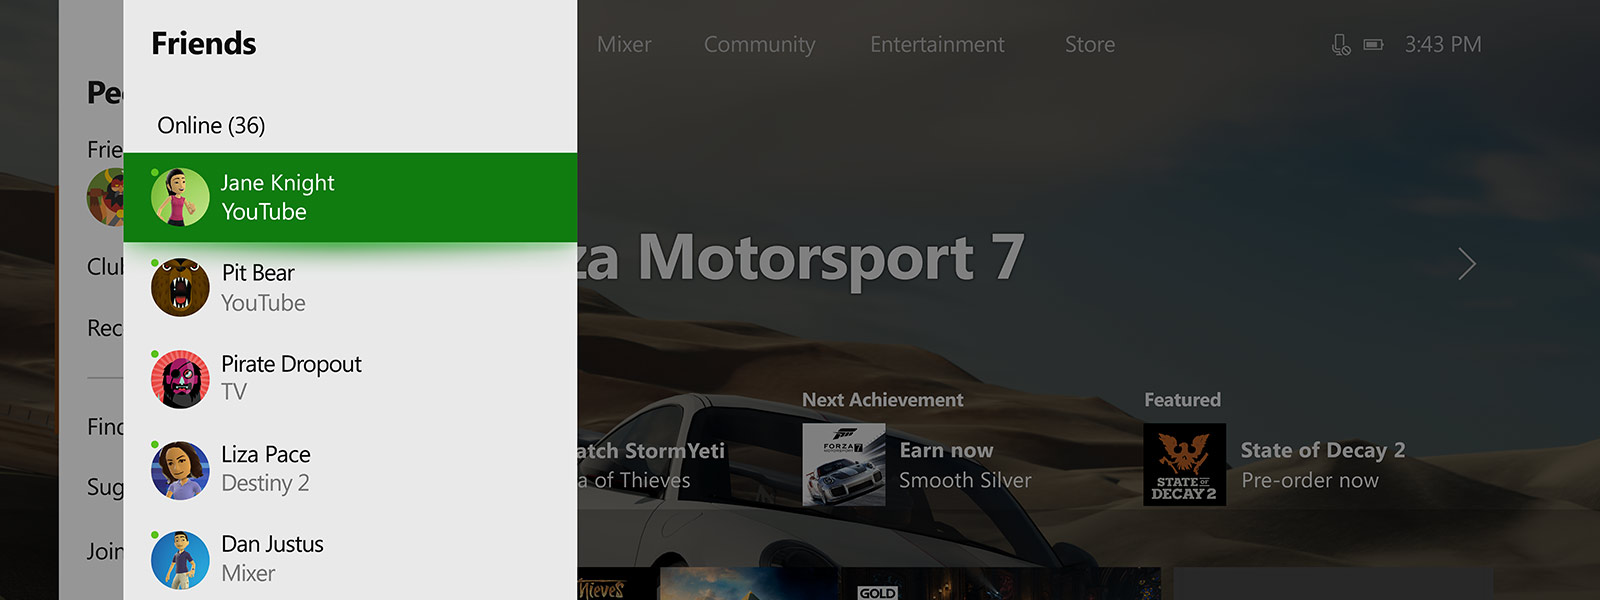 xbox one new dashboard release date